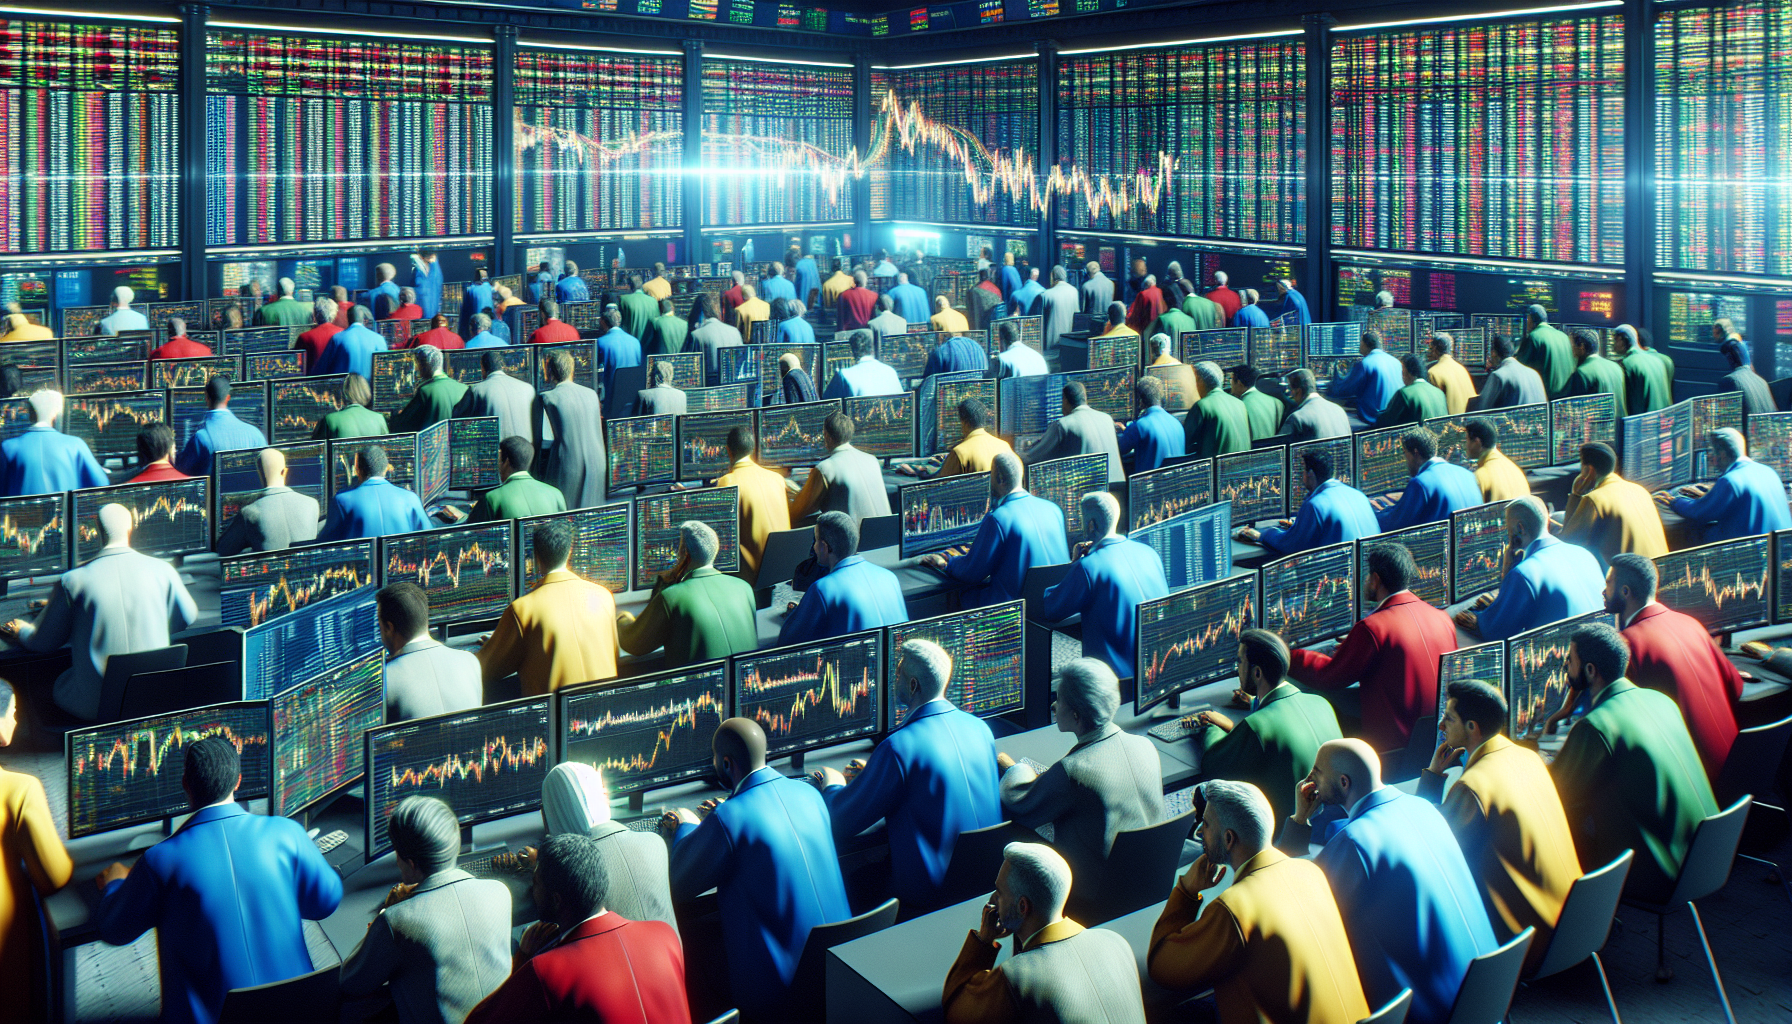 Stock market trading floor with multiple screens displaying stock prices